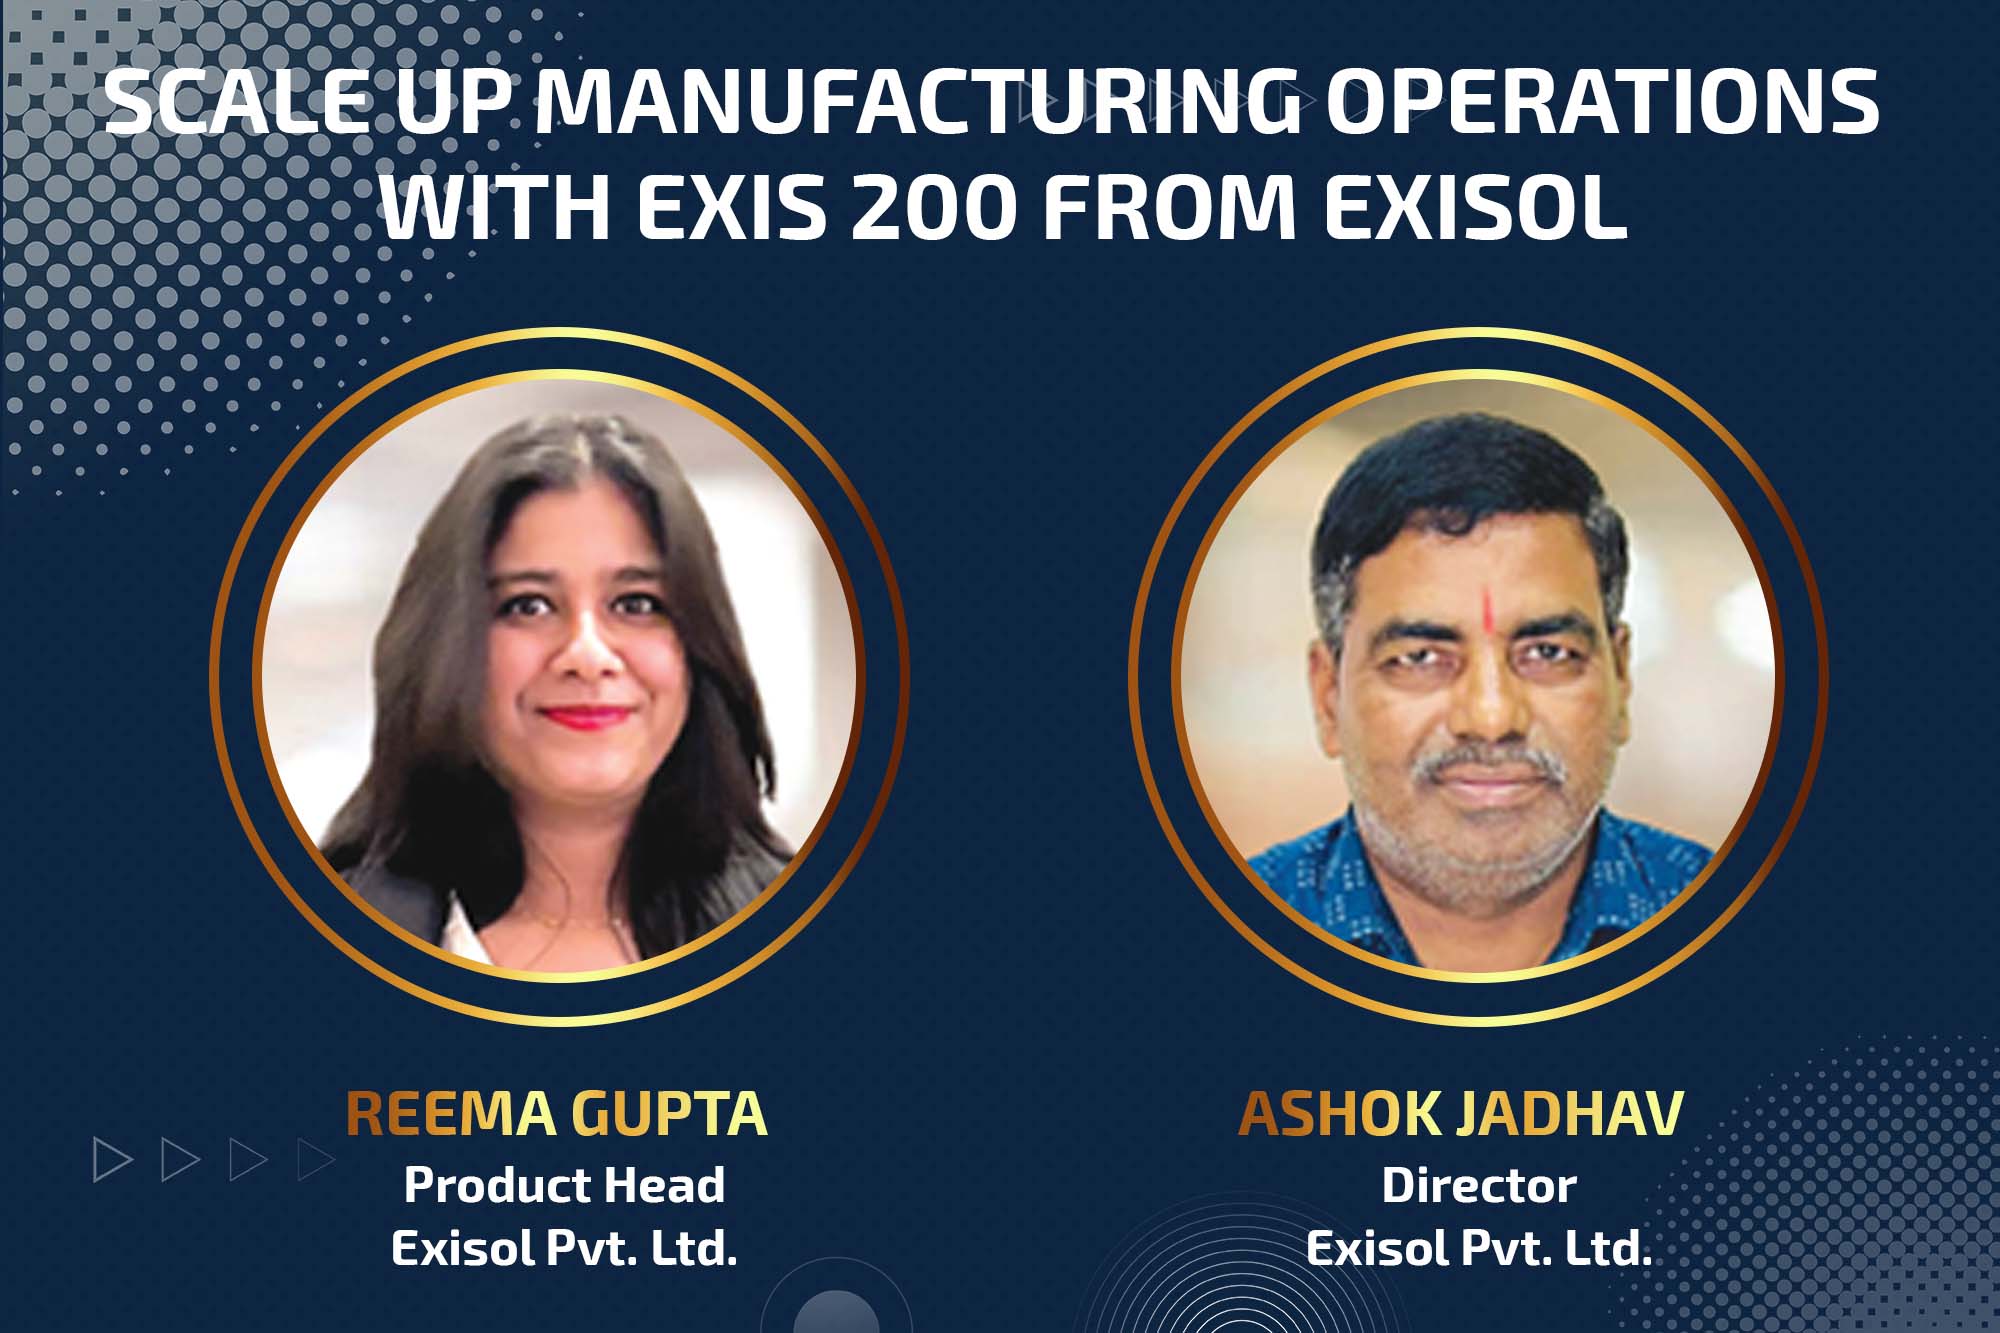 Scale up manufacturing operations with Exis 200 from Exisol